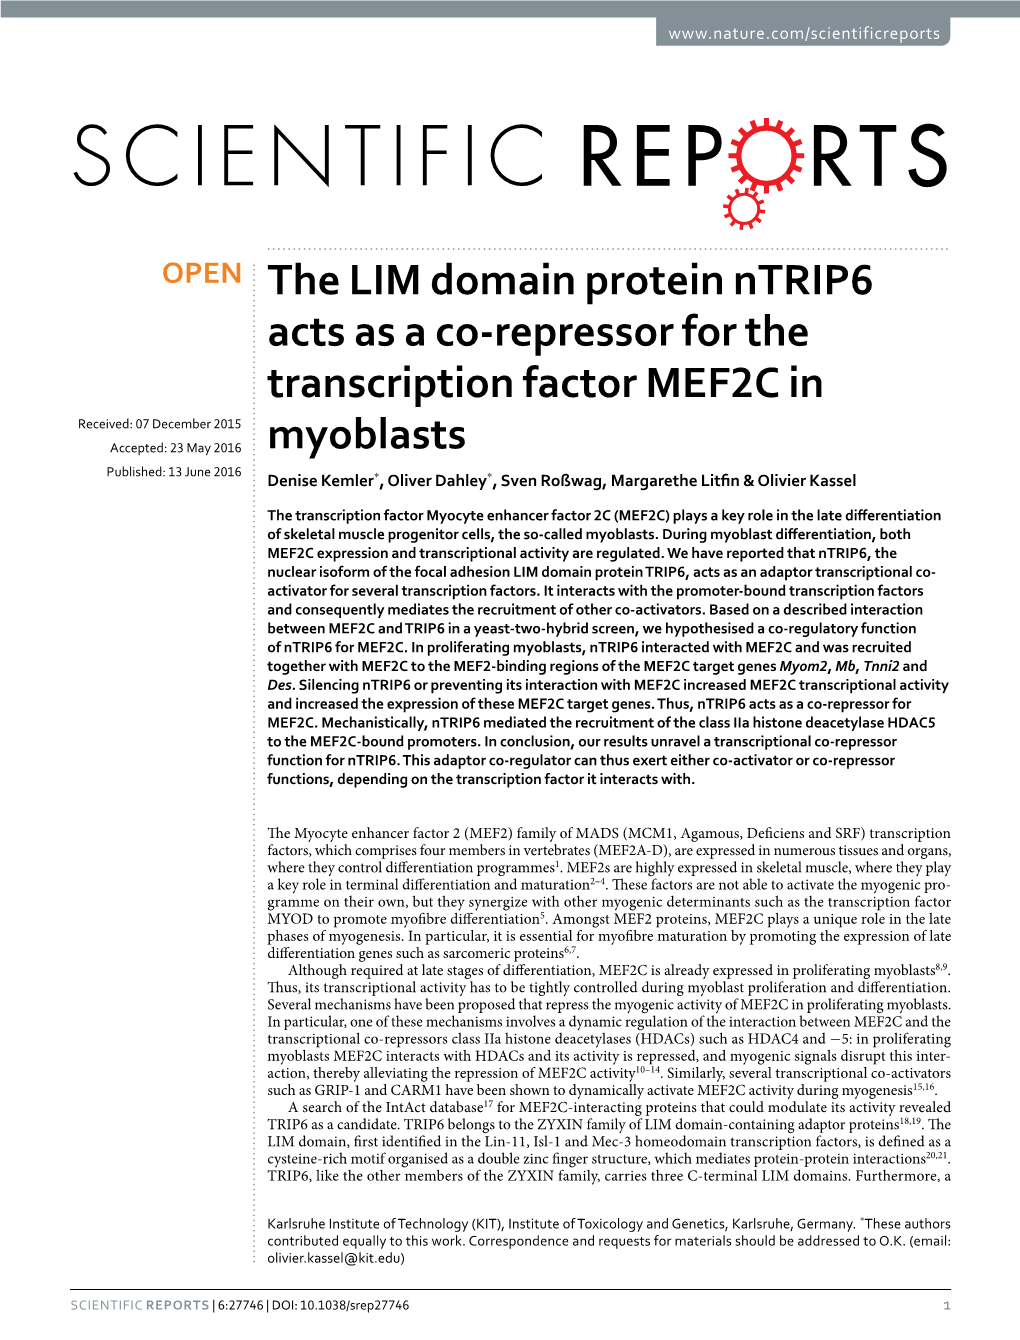 The LIM Domain Protein Ntrip6 Acts As a Co-Repressor for the Transcription Factor MEF2C in Myoblasts